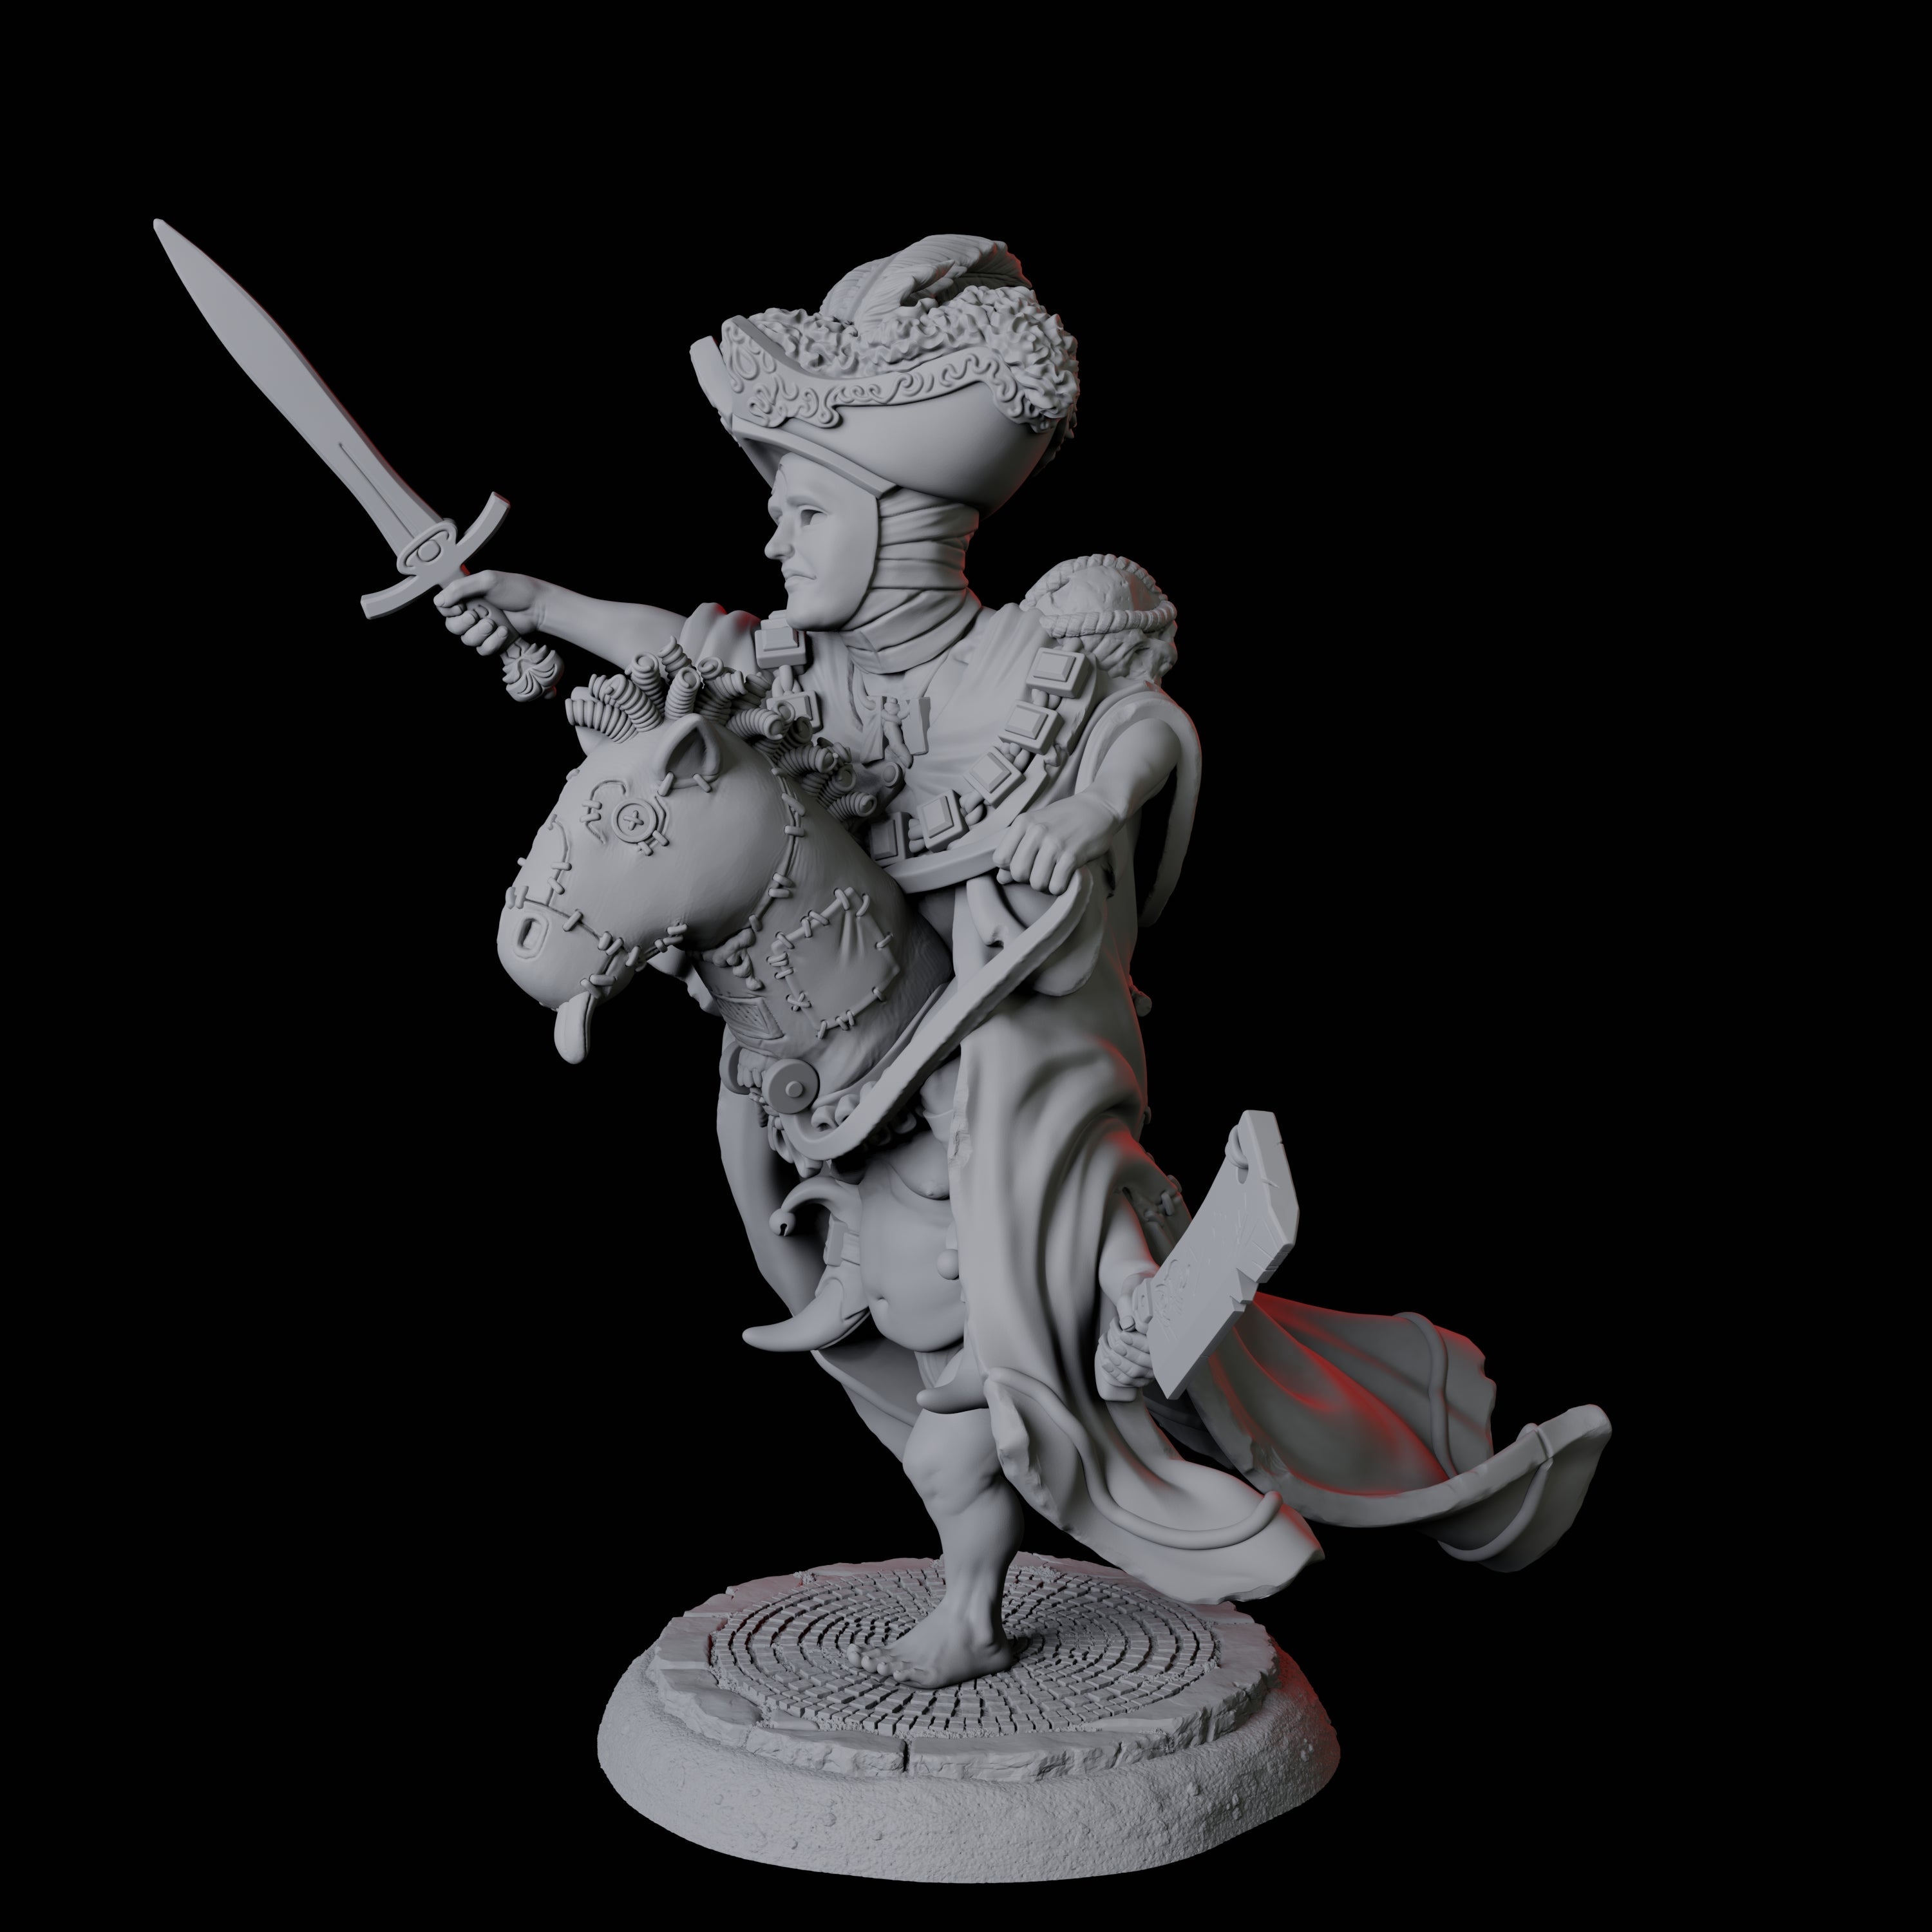 Weird Halfling Jester Pair D Miniature for Dungeons and Dragons, Pathfinder or other TTRPGs